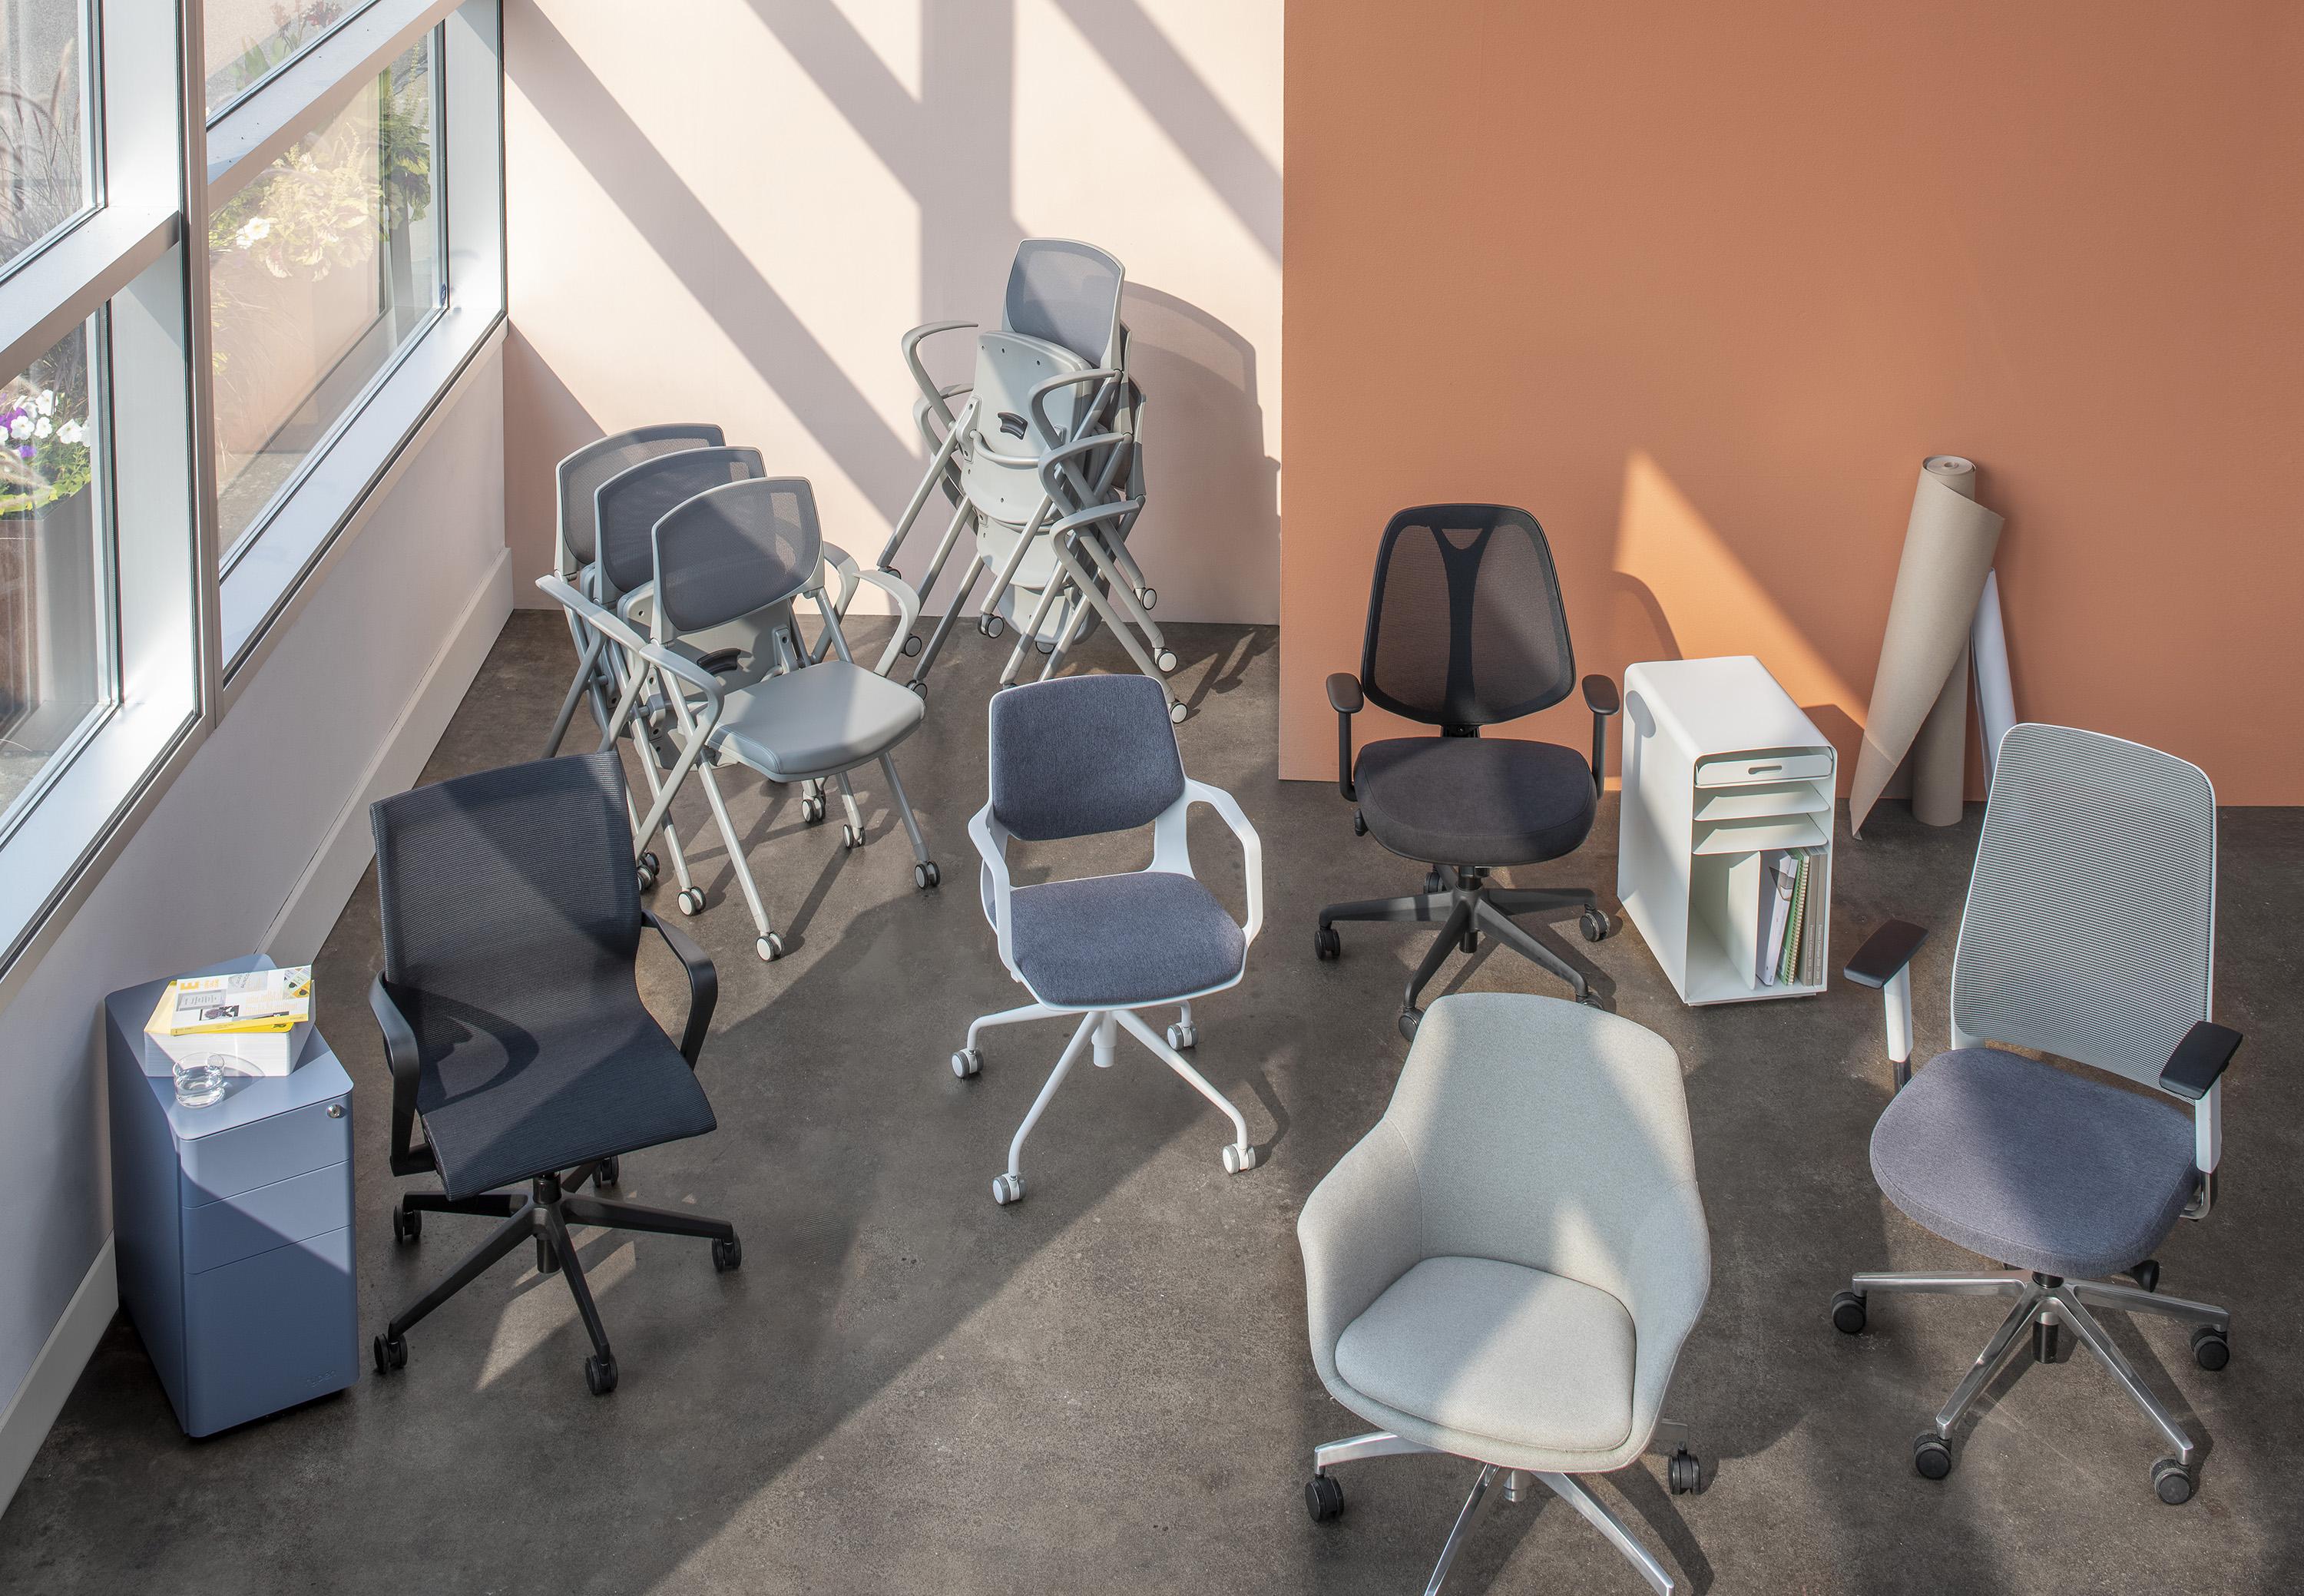 Task Chairs Image